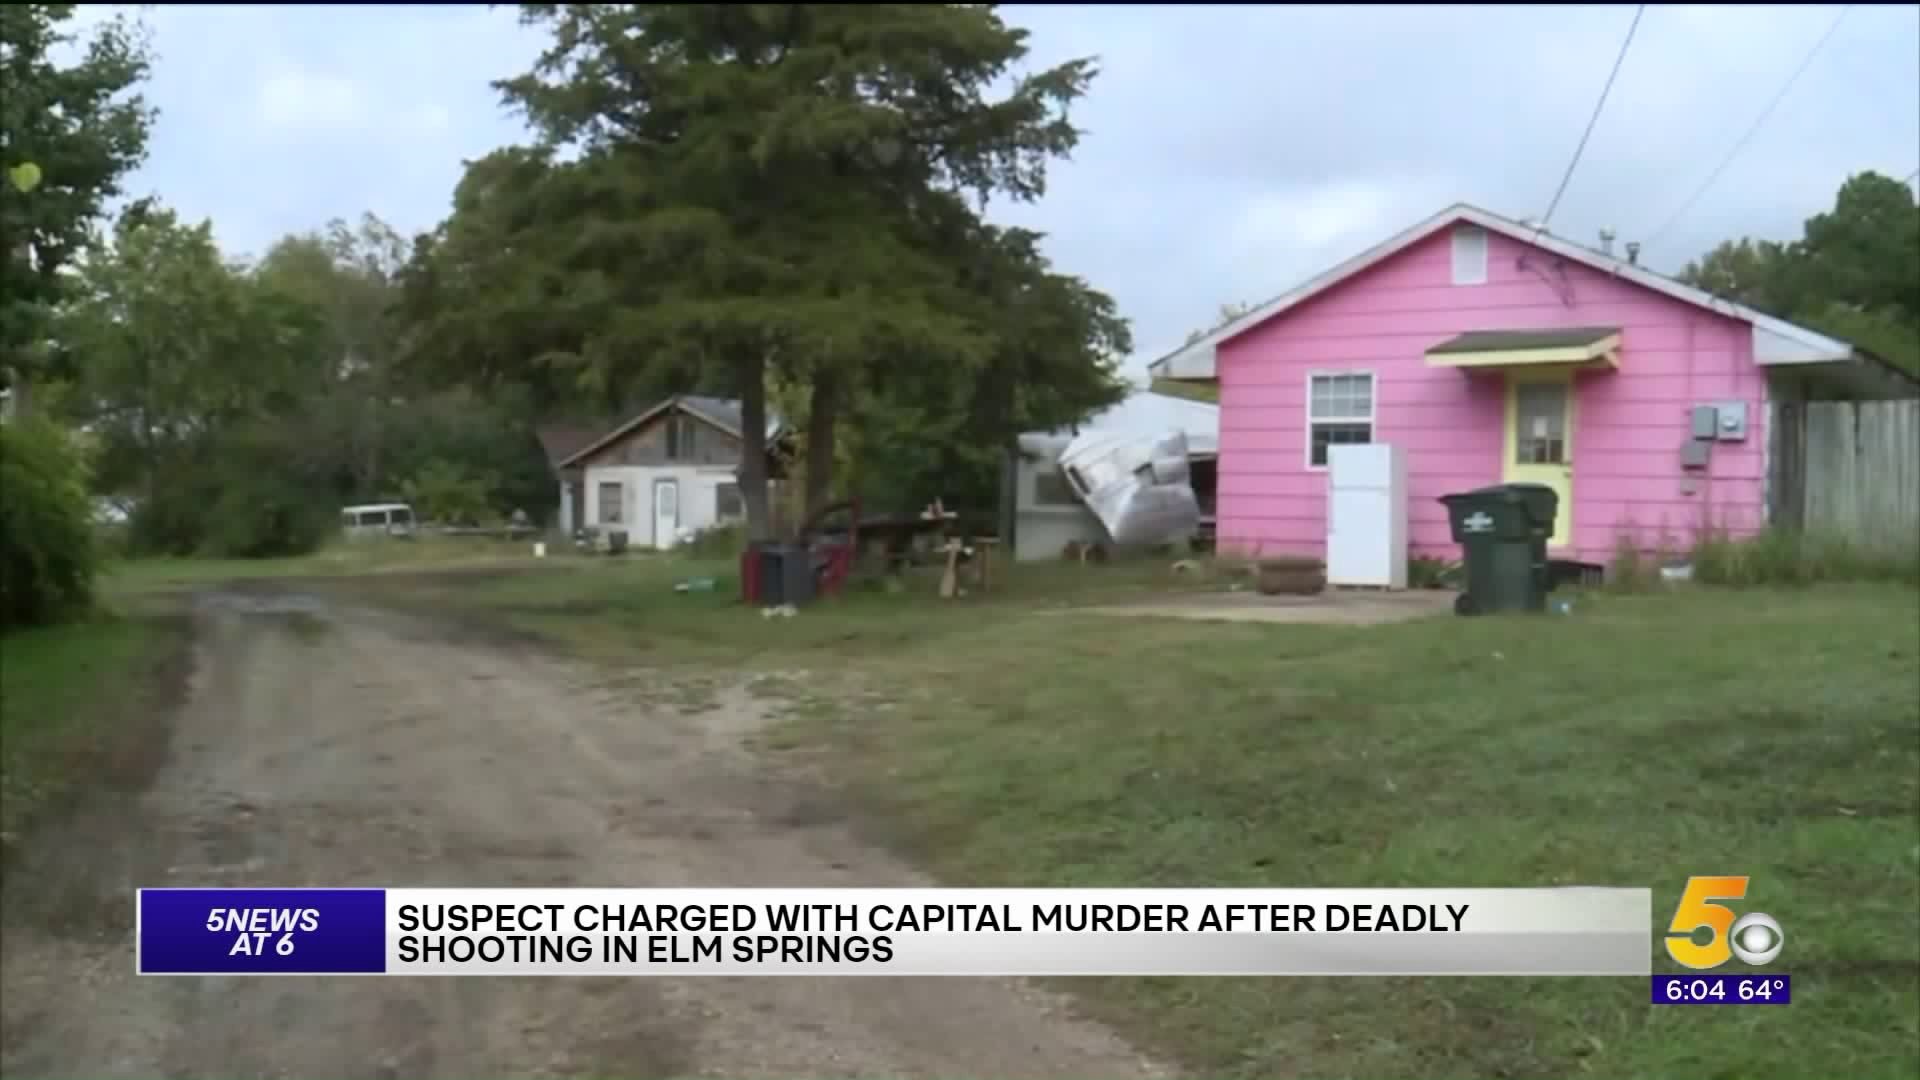 Suspect Charged With Capital Murder In Elm Springs Shooting Death